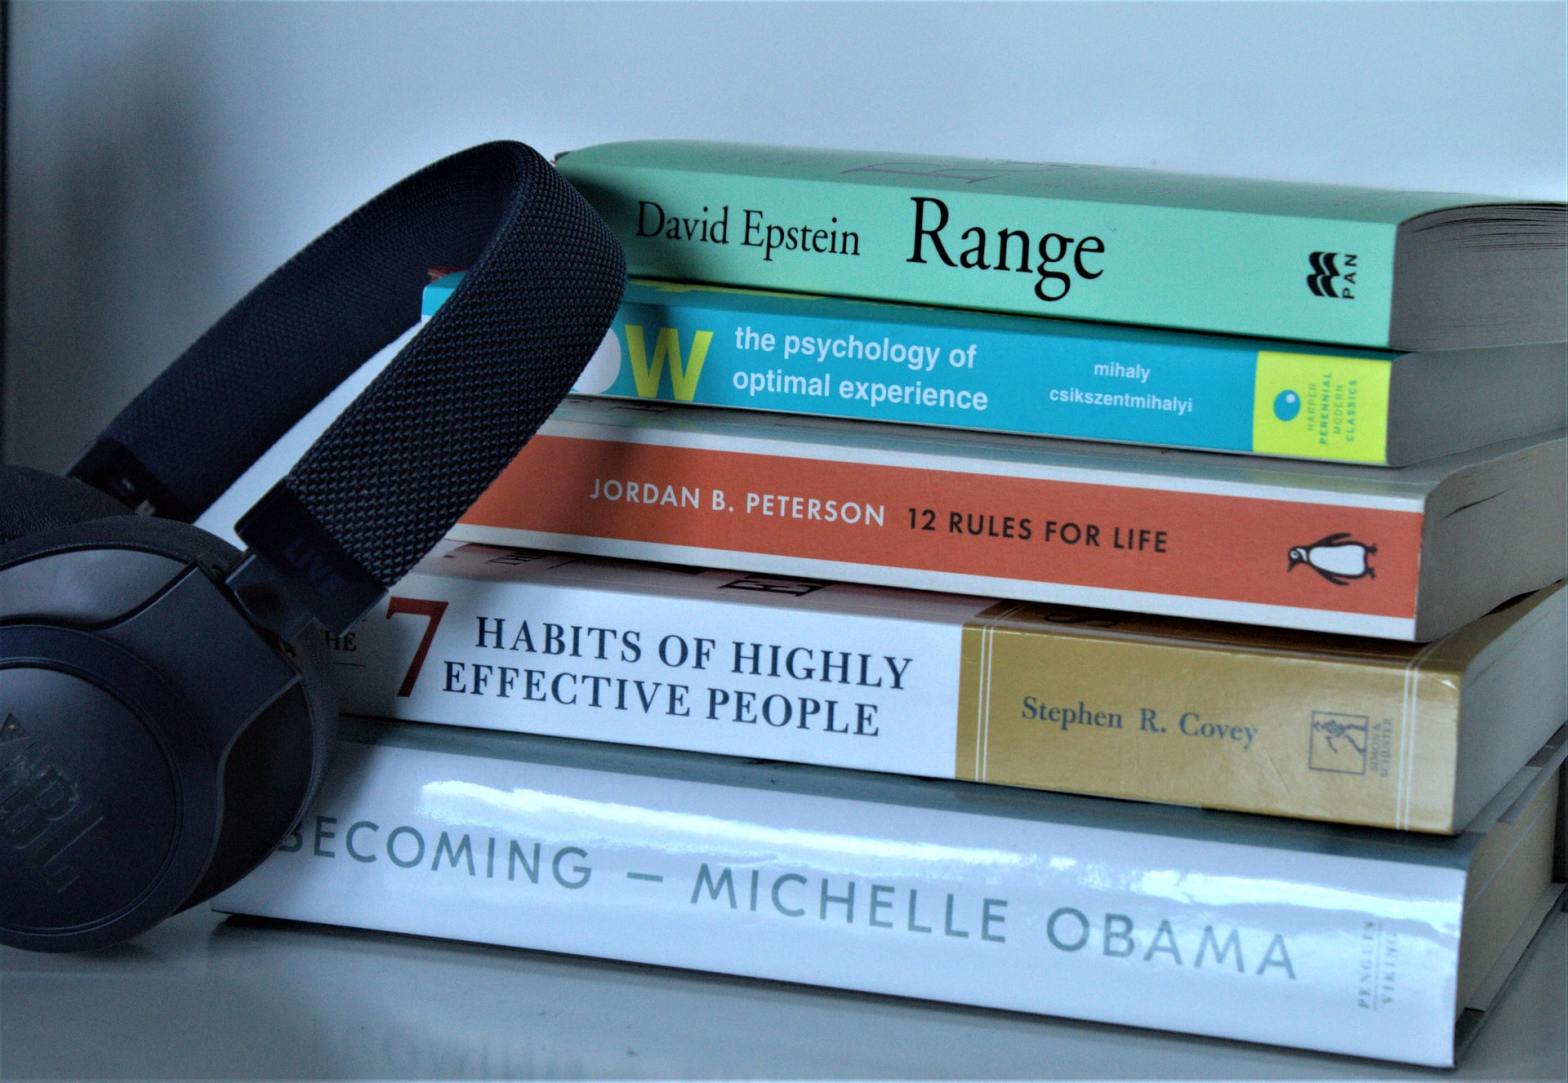 Pile of books and a headphone